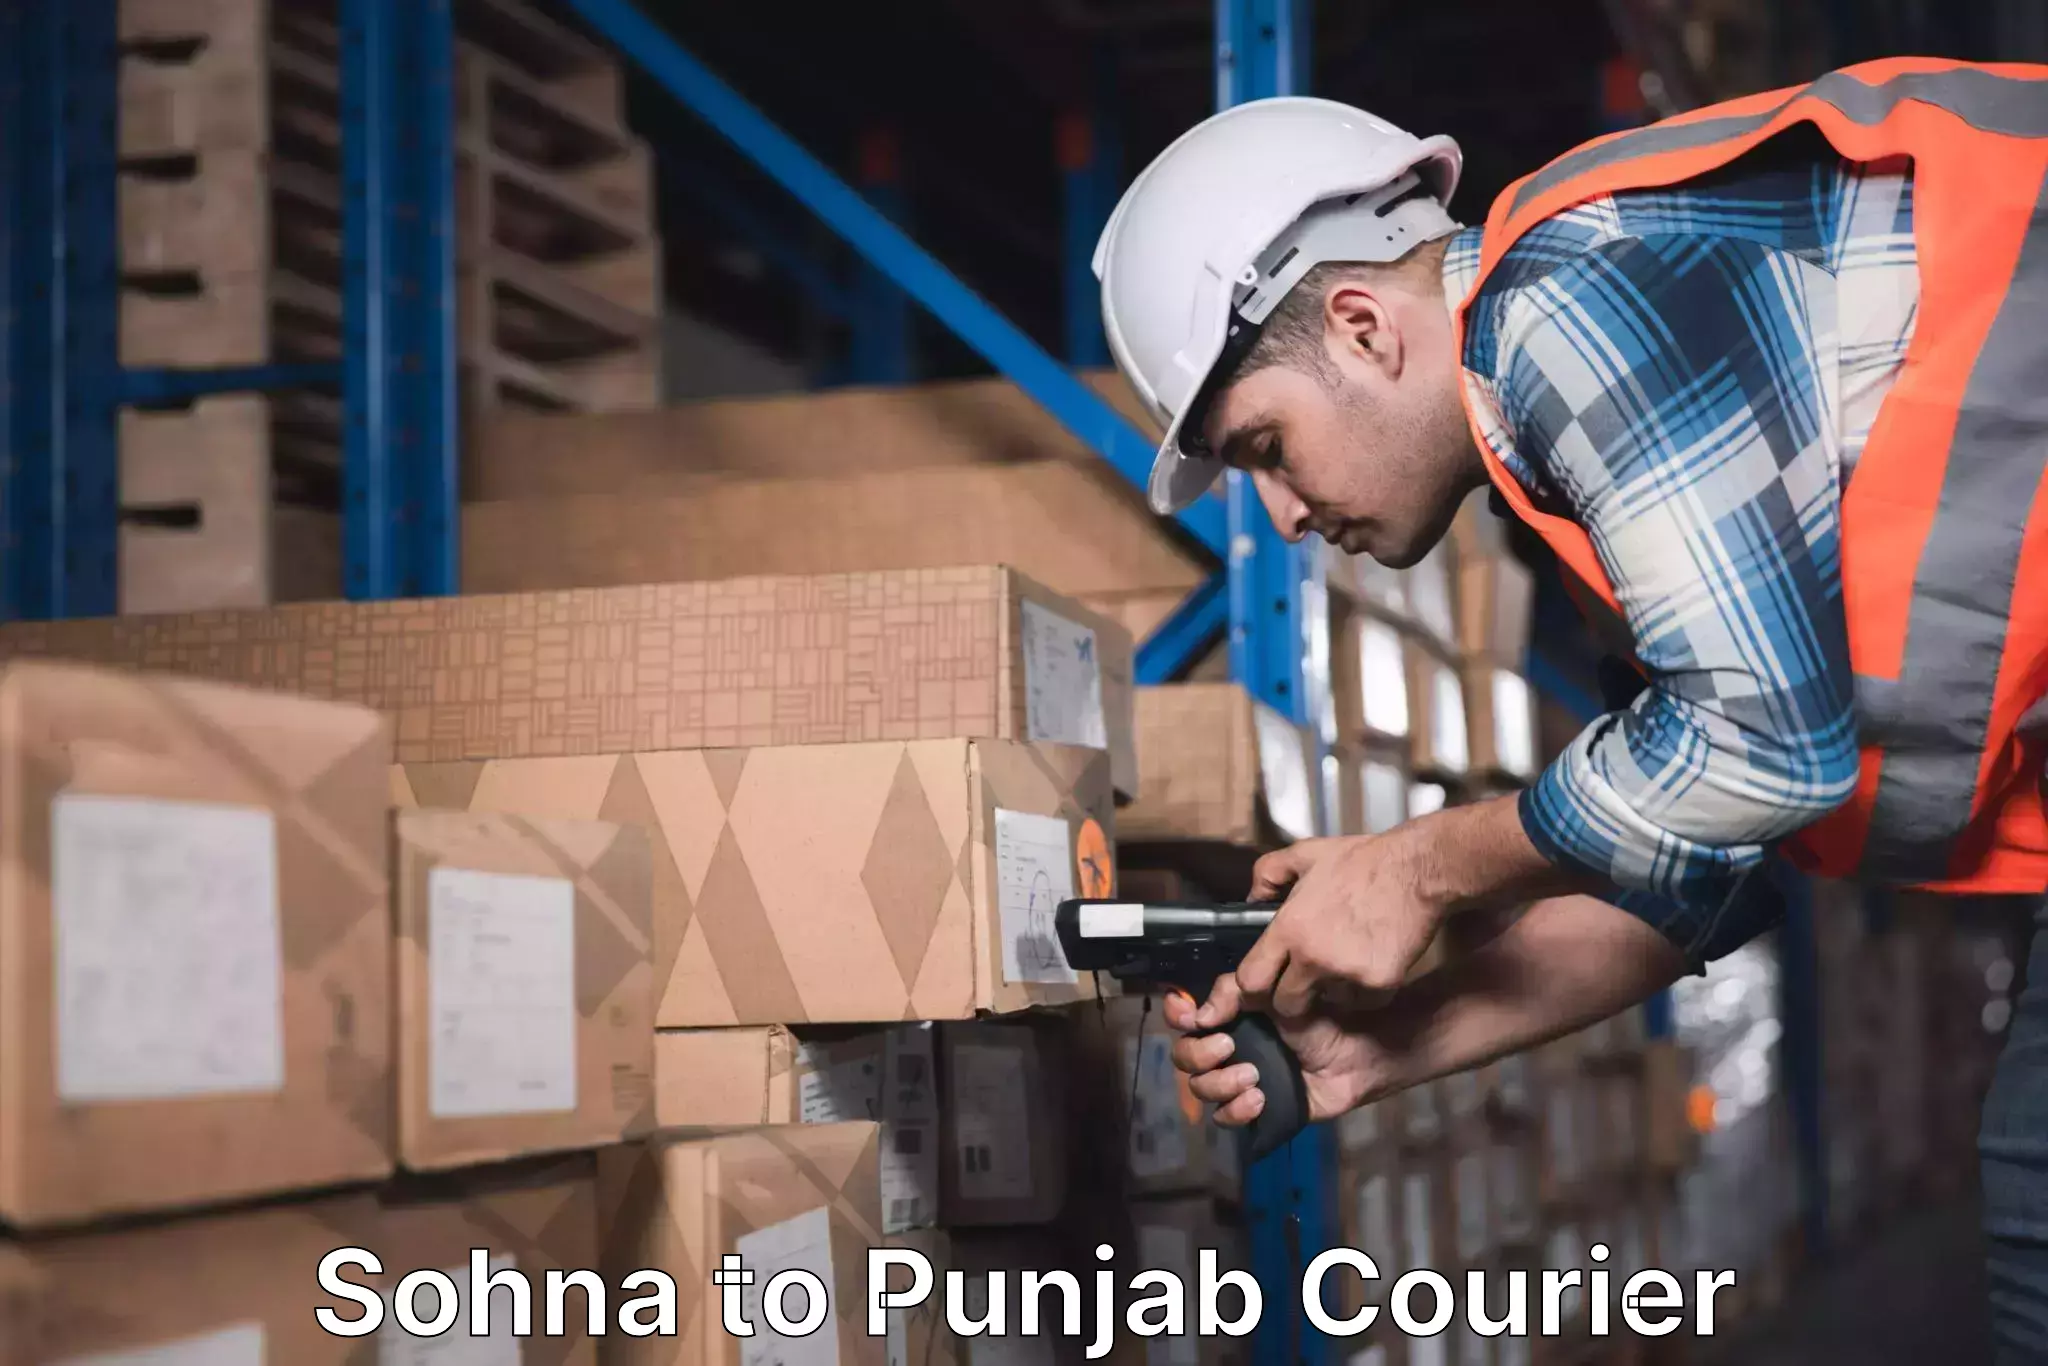 Global courier networks Sohna to Abohar